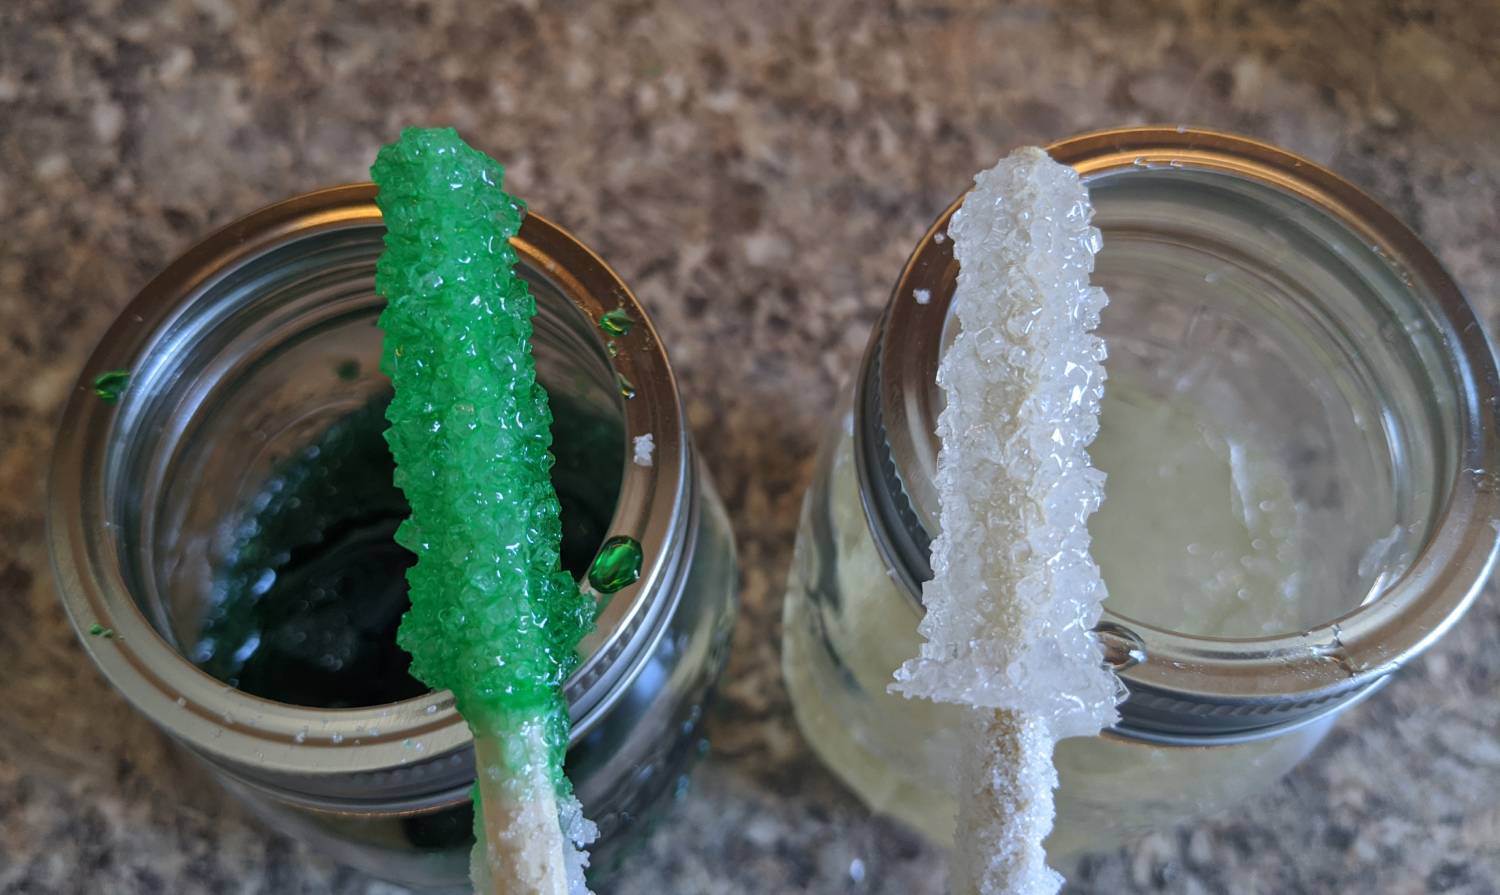 Stay-at-home science project: Grow your own rock candy